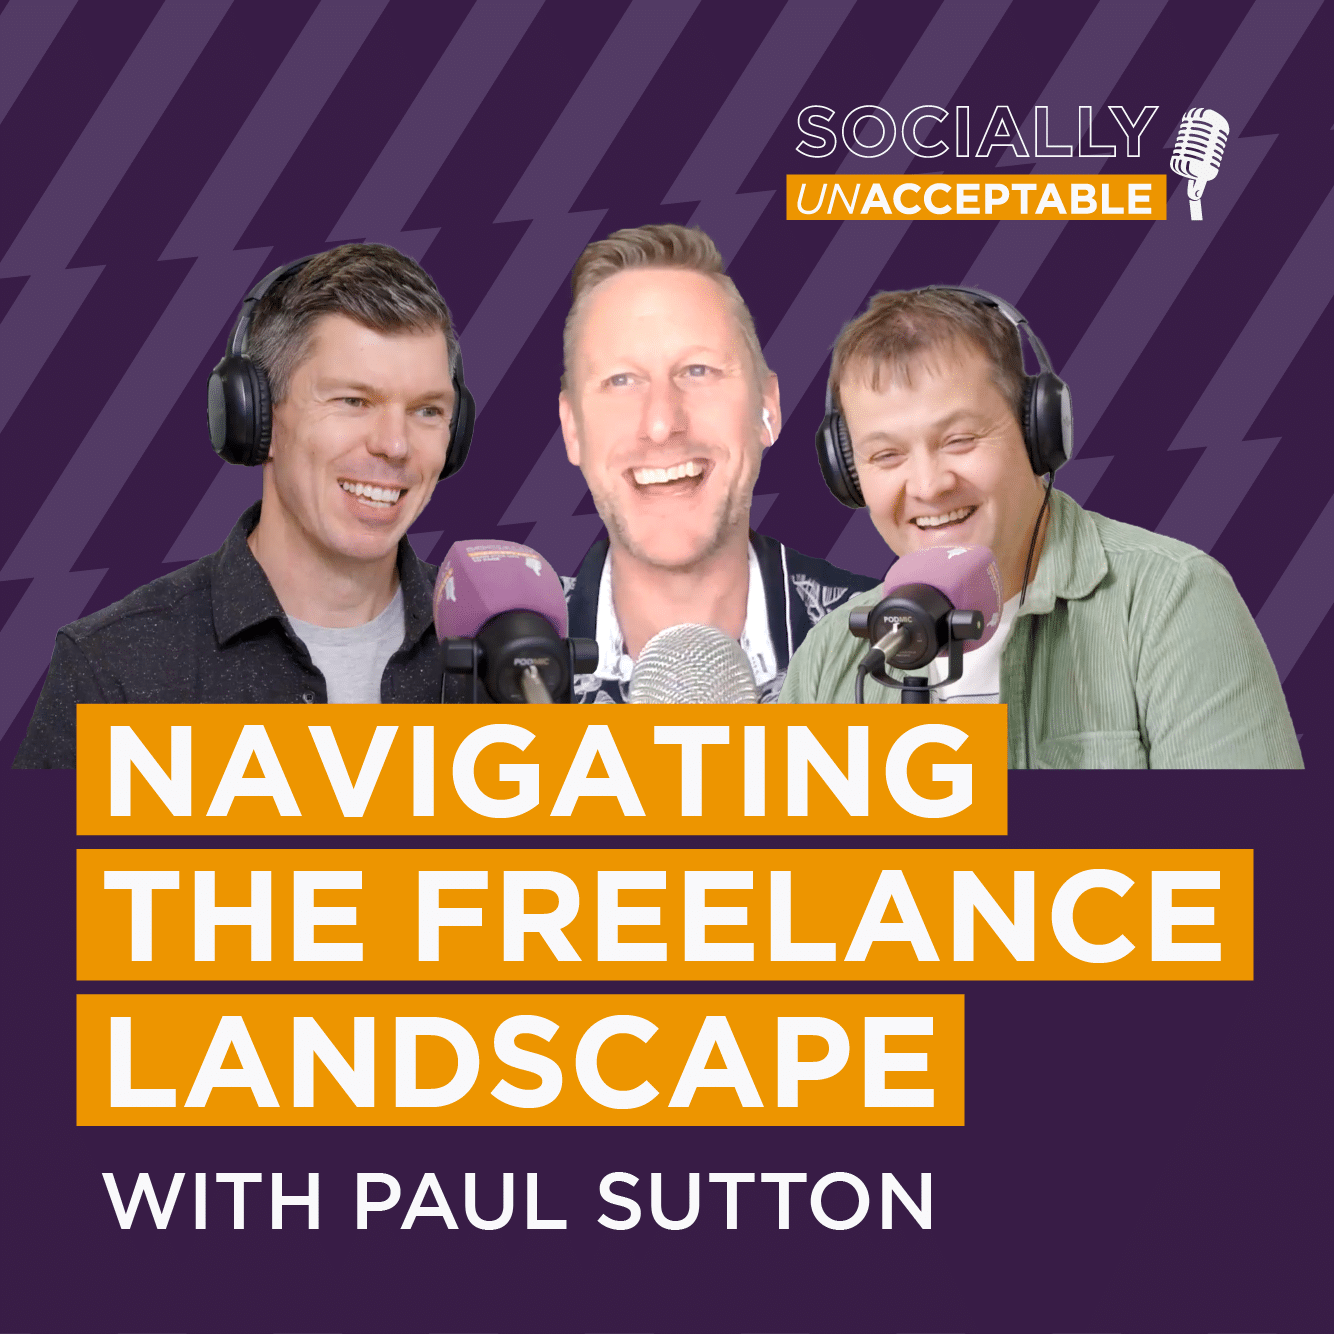 My freelance journey and how I almost lost everything – Socially Unacceptable Podcast